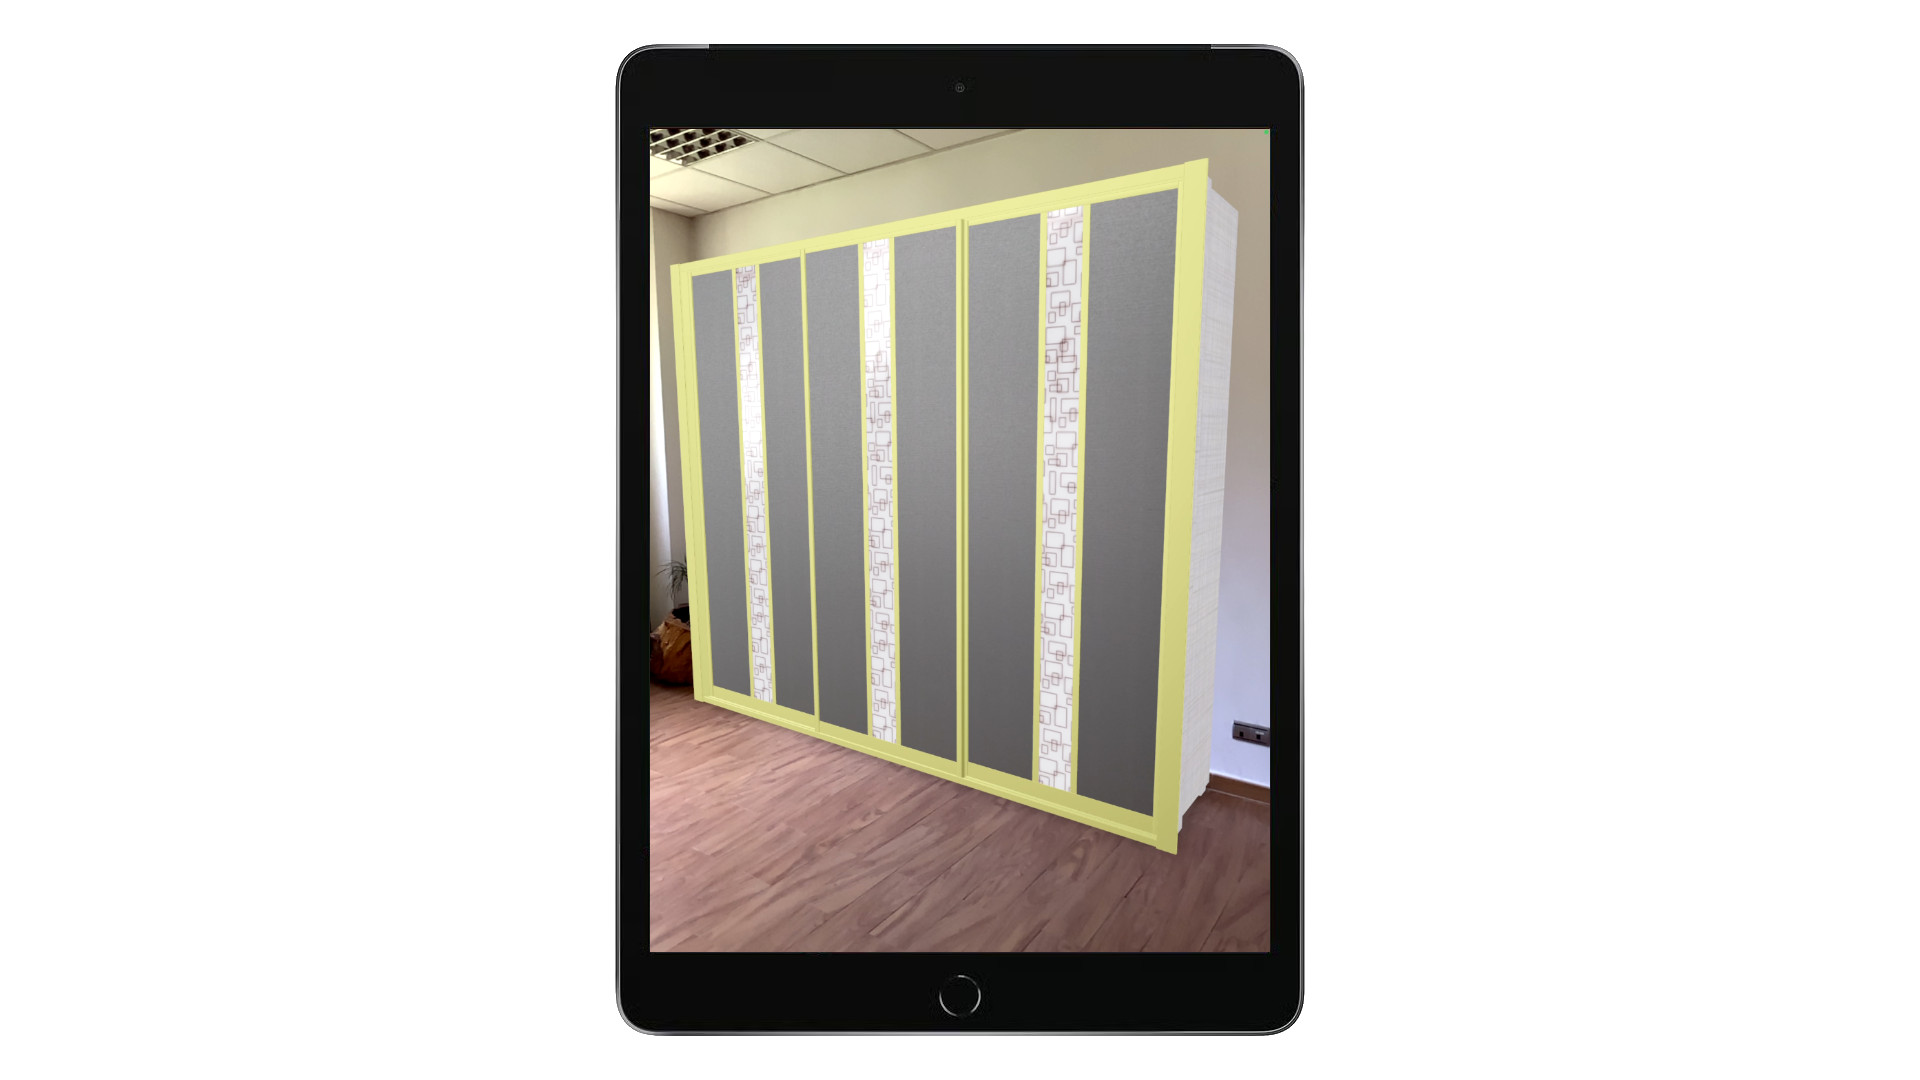 Augmented Reality visualization of the wardrobe